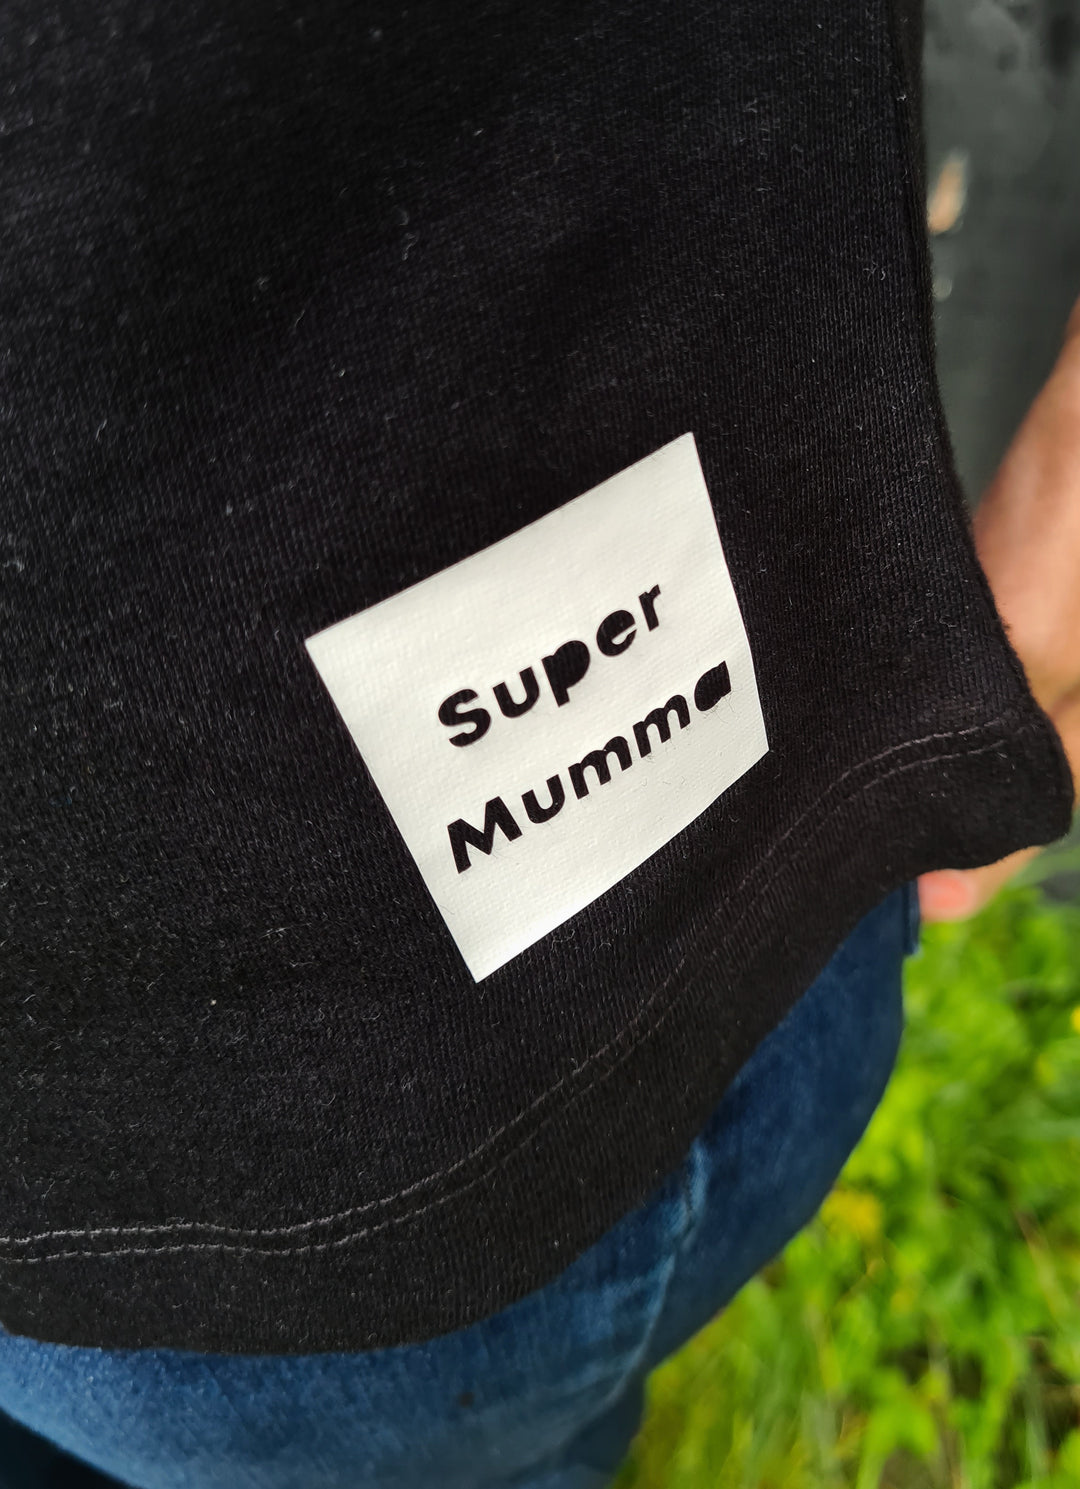 Super Mumma Squeeze Square for Anxiety Grounding Technique